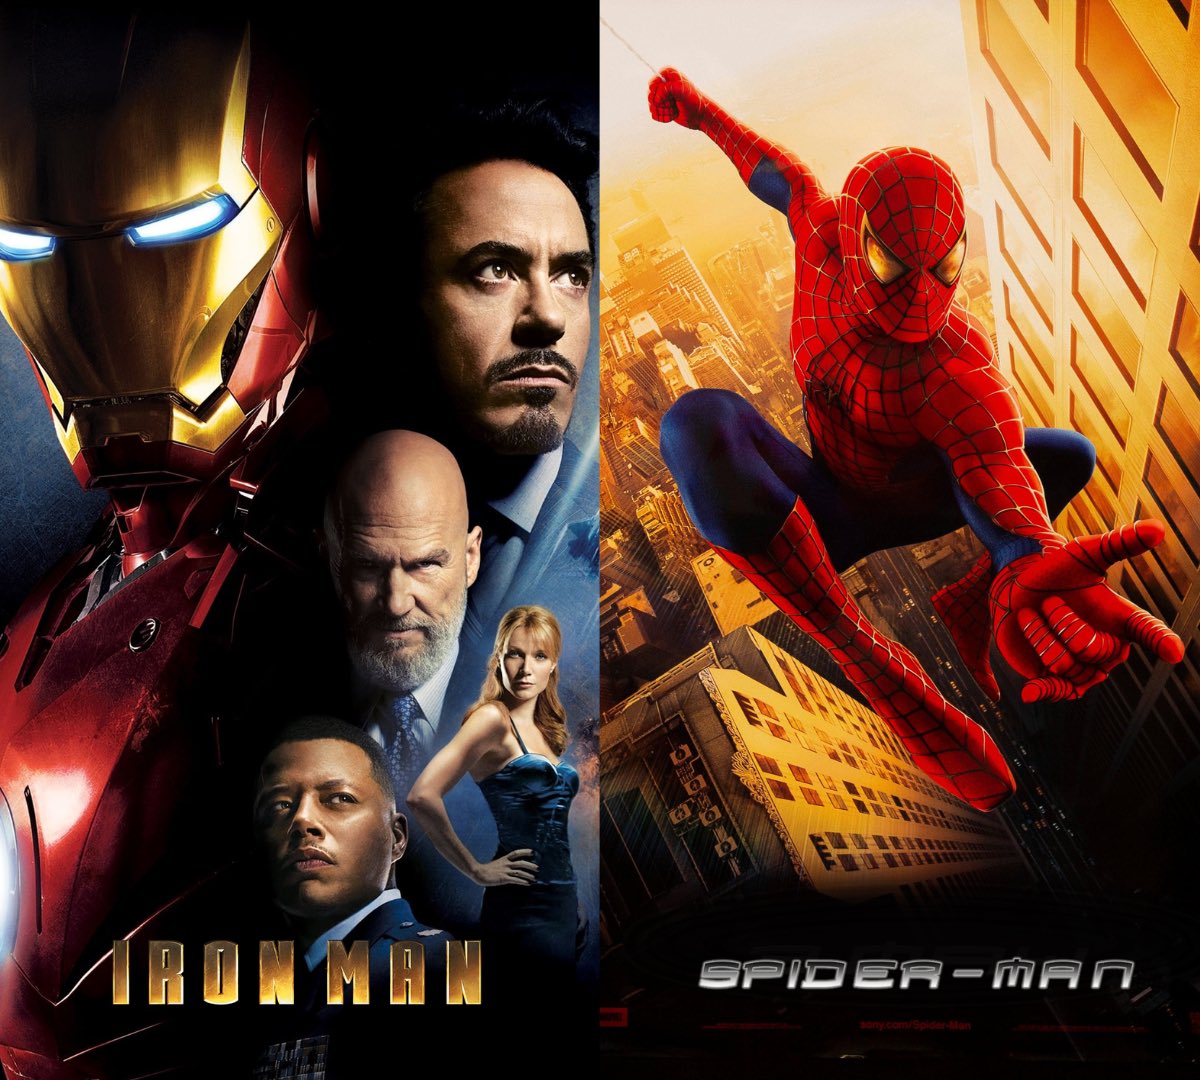 16 years since Iron Man. 22 years since Spider-Man.